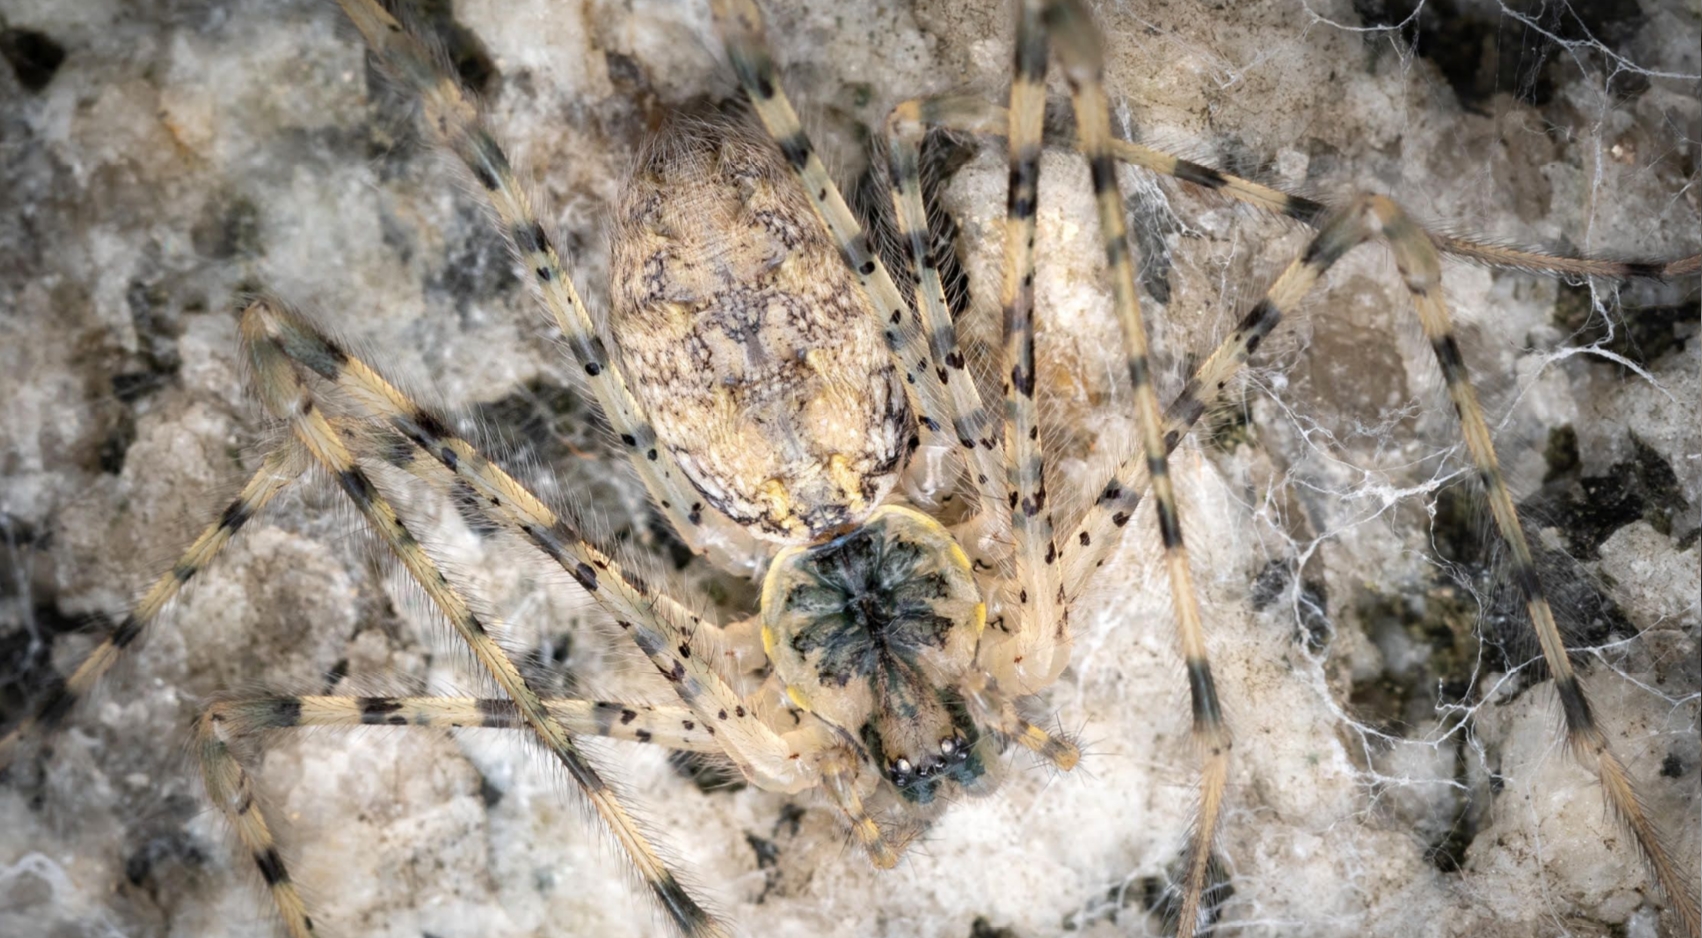 A black and yellow Hypochilus spider sits on a rock in the southern Sierra Nevada. Courtesy of Marshal Hedin